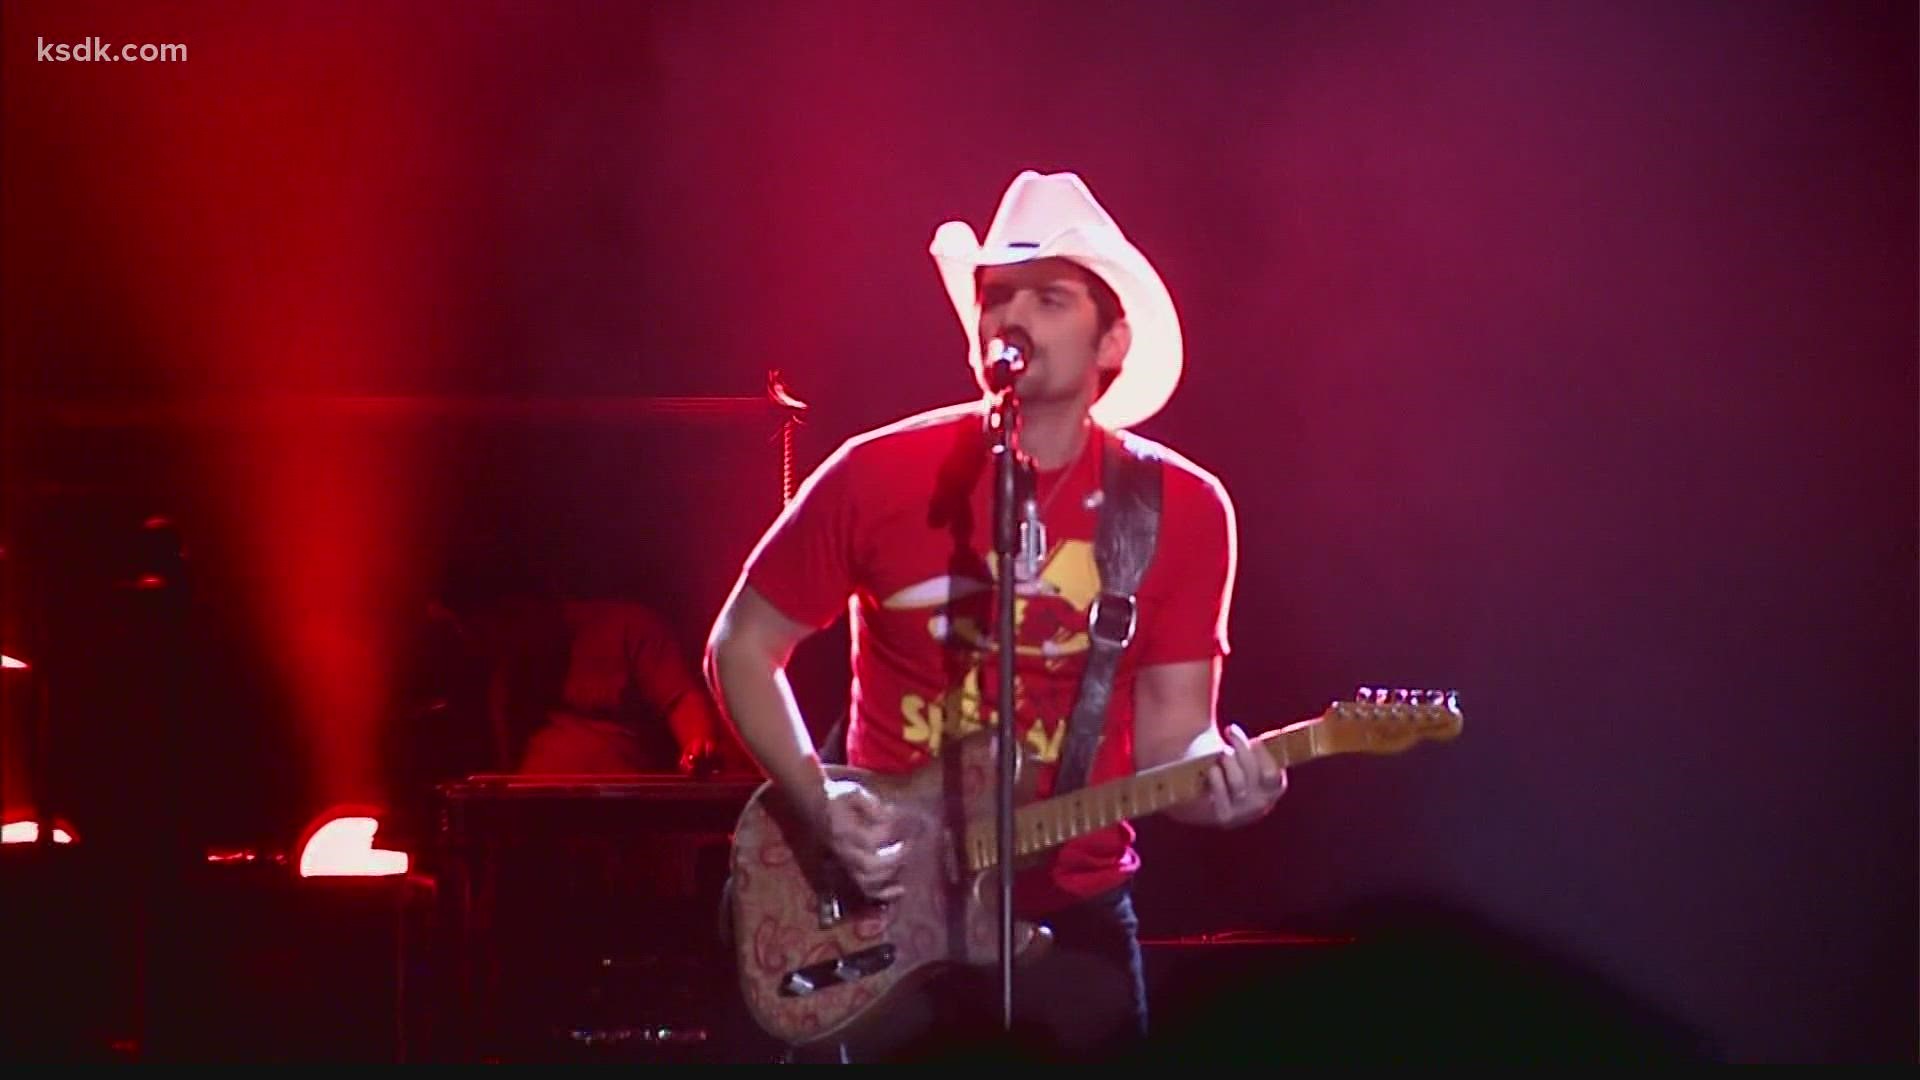 Country music star Brad Paisley is playing a benefit show for Cardinal Glennon Children’s Hospital next year. He’s coming to Chaifetz Arena in April.